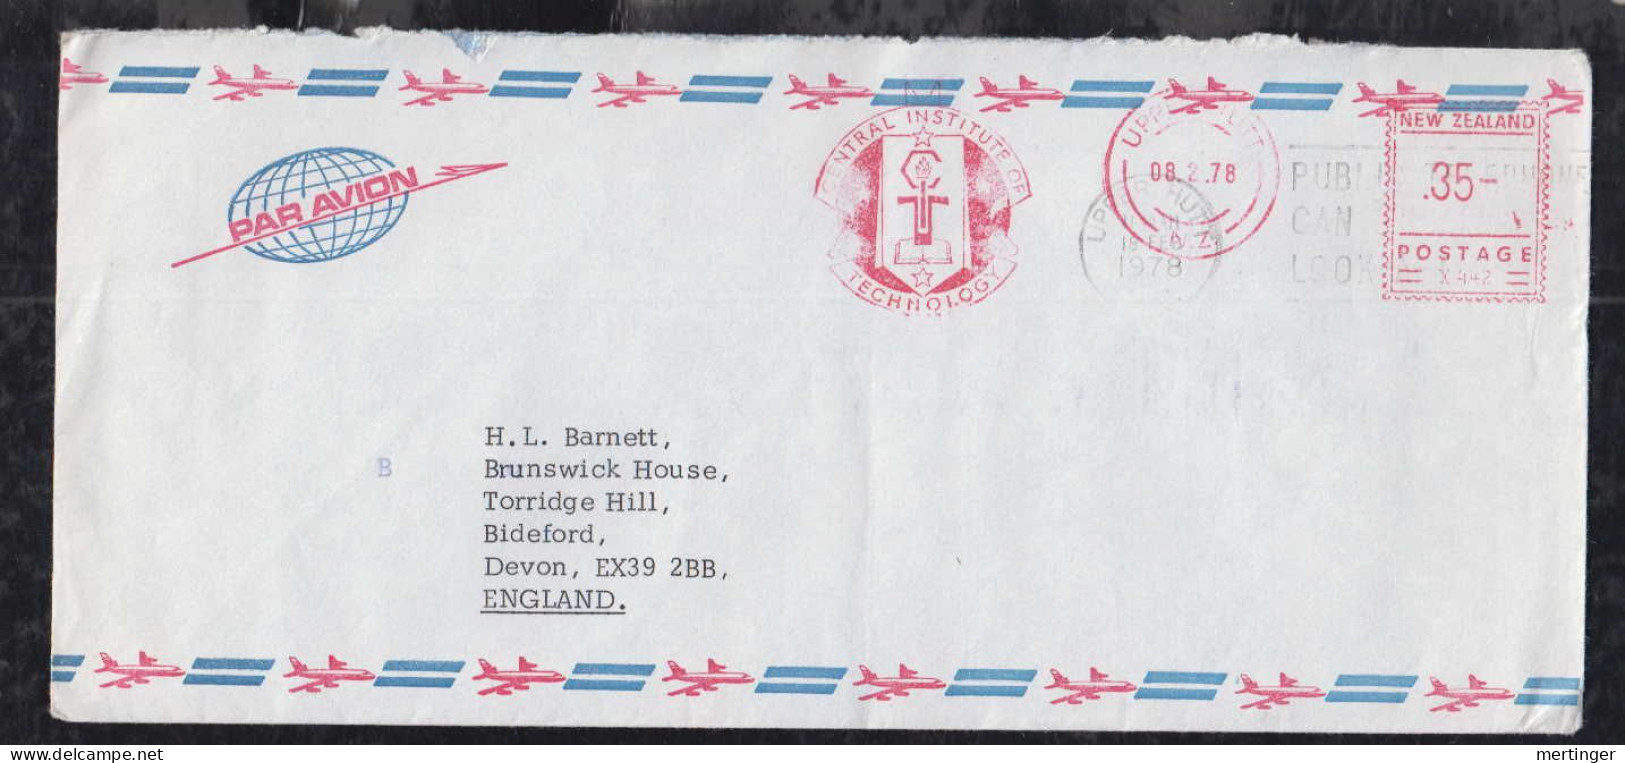 New Zealand 1978 Meter Airmail Cover 35c UPPER HUTT To Bideford England Central Institute Of Technology - Briefe U. Dokumente